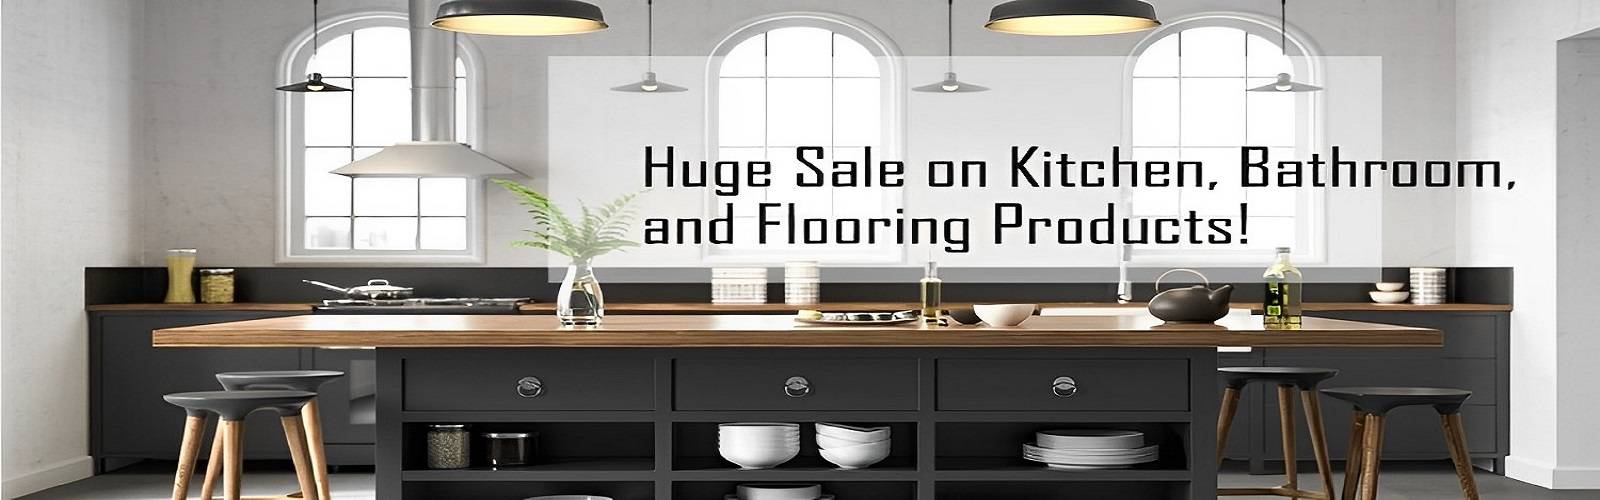 kitchen bathroom and flooring products sale